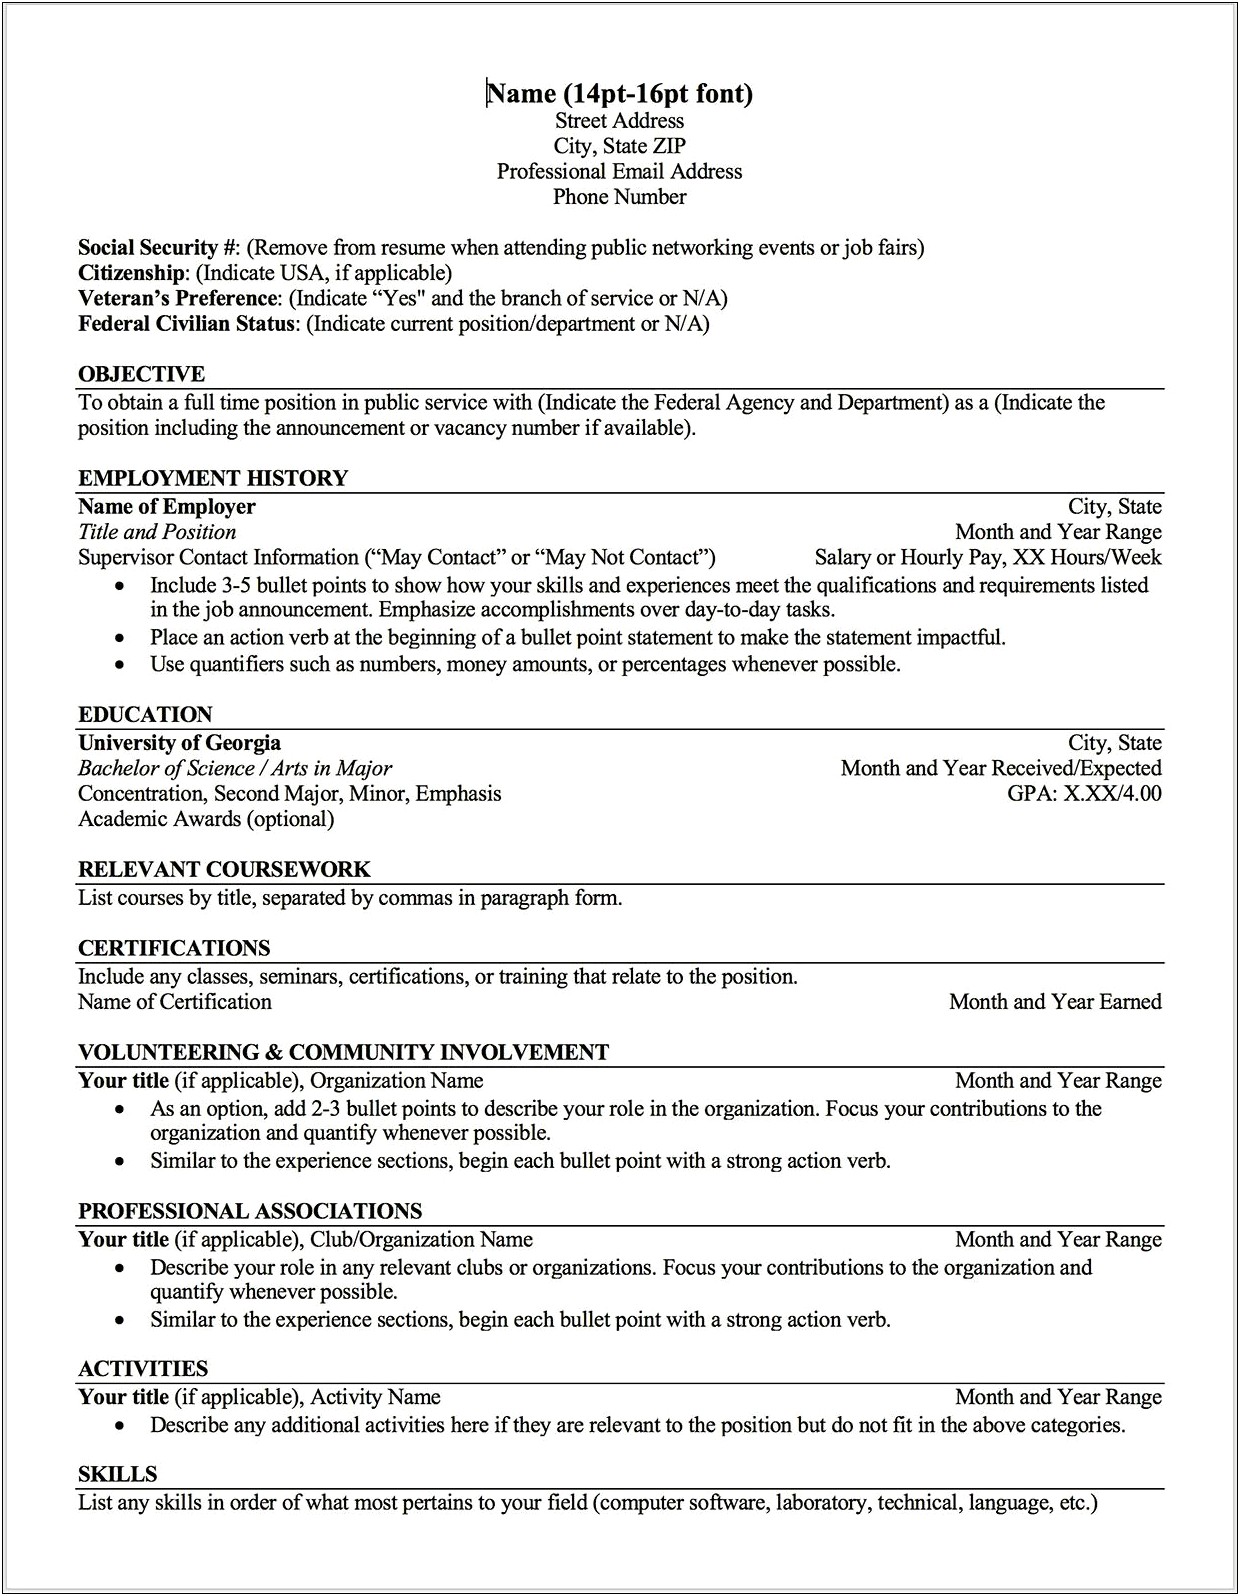 Skills Section Of Resume Paragraph Or Bullets